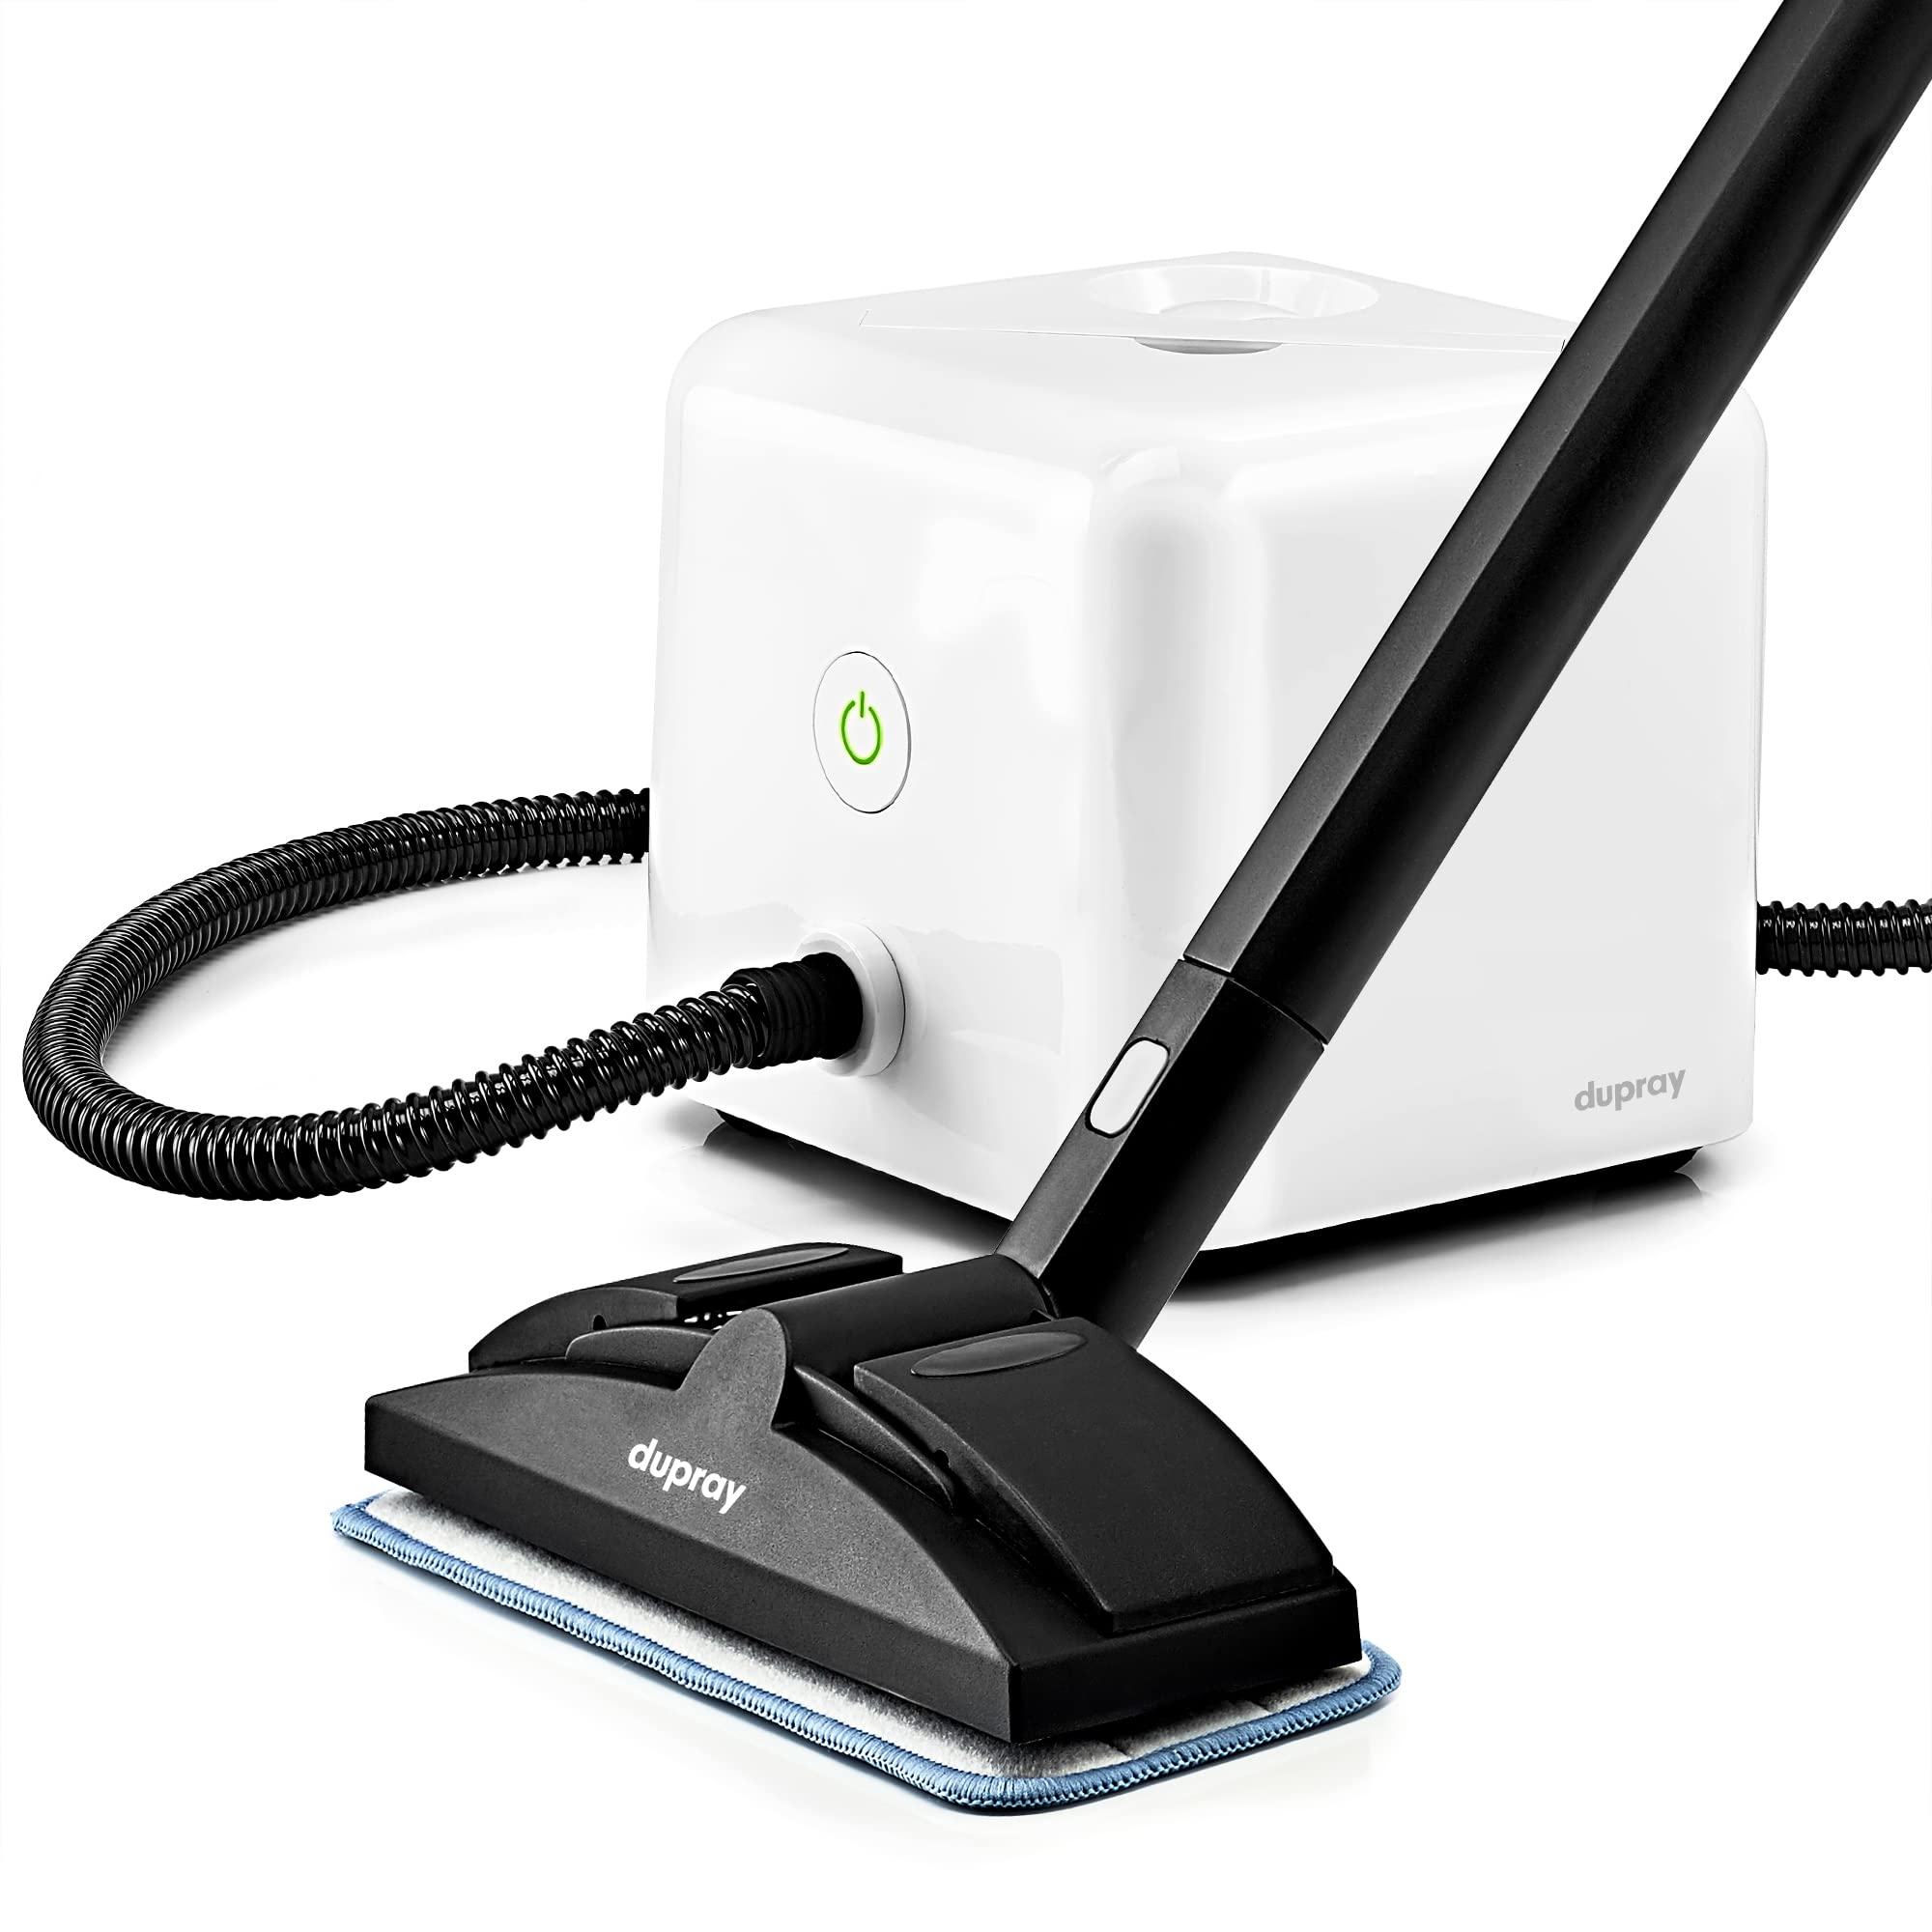 Dupray Neat Steam Cleaner Powerful Multipurpose Portable Heavy Duty Steamer for Floors, Cars, Tiles, Grout Cleaning. Chemical Free, Disinfection, for Home Use. Kills 99.99%* of Bacteria and Viruses.